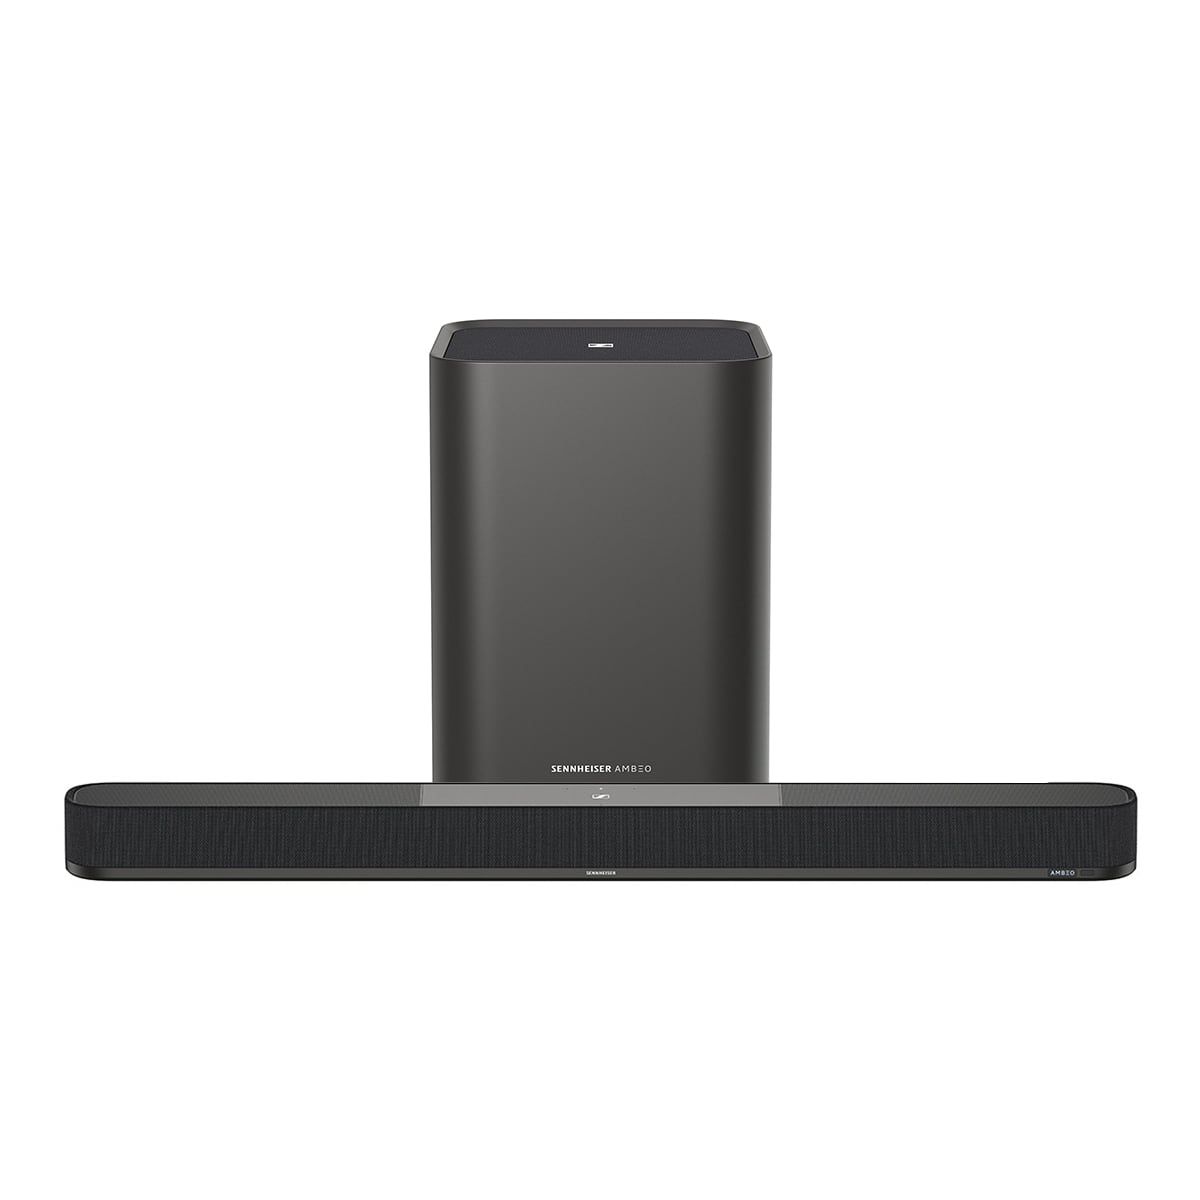 Sennheiser AMBEO Soundbar Plus 7.1.4 Channel Soundbar with Dolby Atmos and DTS:X with Ambeo Sub 8in 350W Wireless Subwoofer with Bluetooth